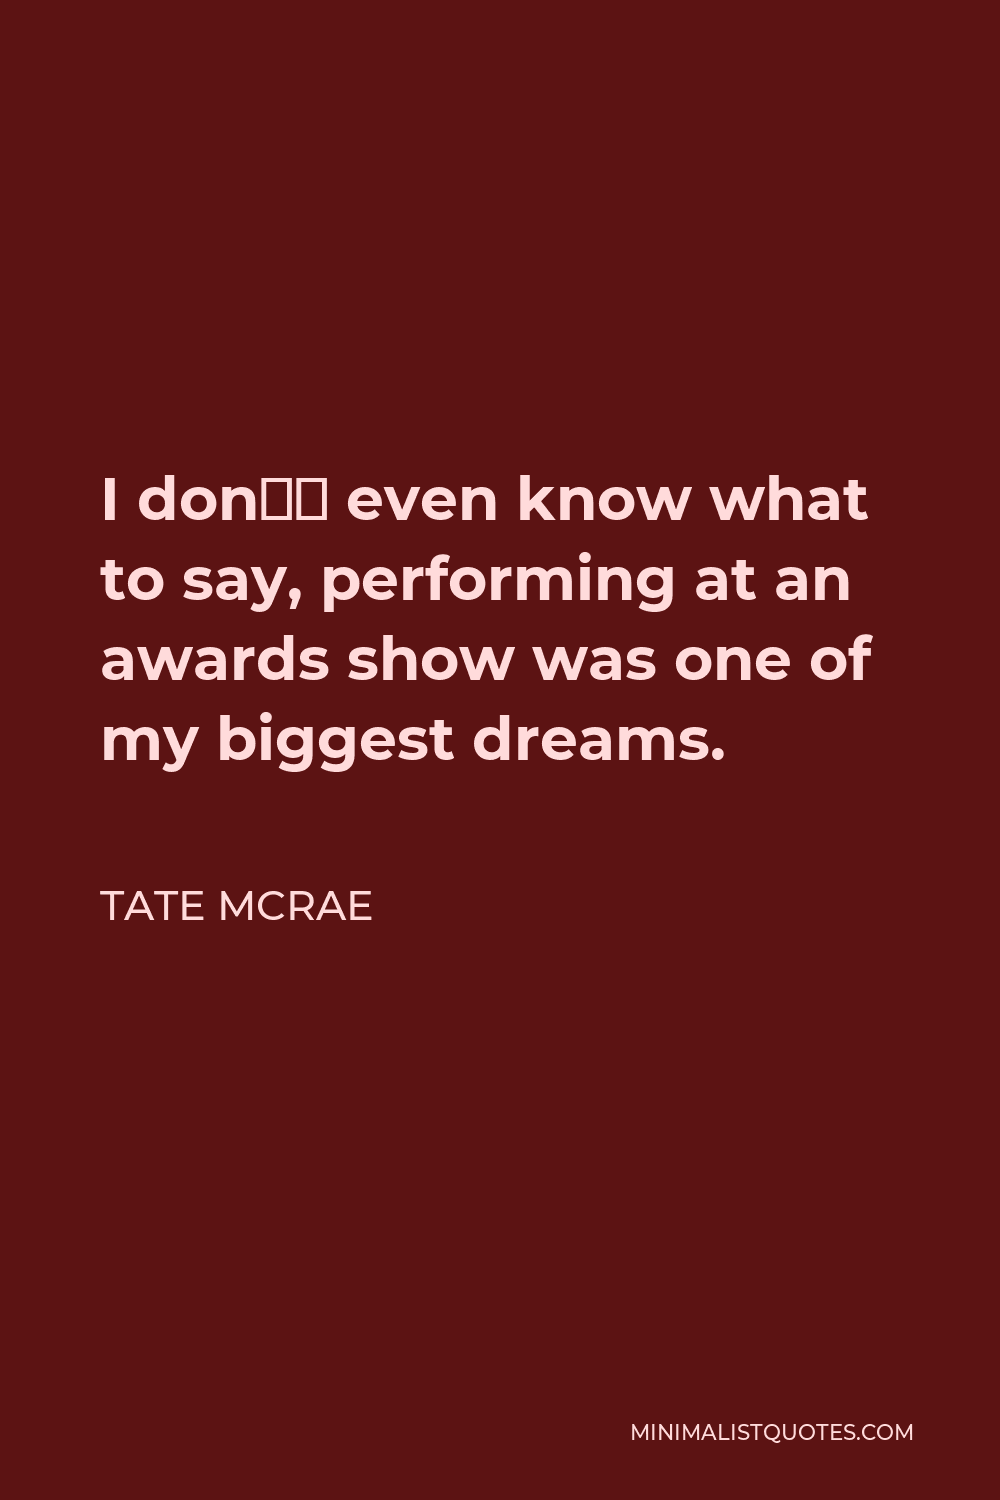 Tate McRae Quote - I don’t even know what to say, performing at an awards show was one of my biggest dreams.